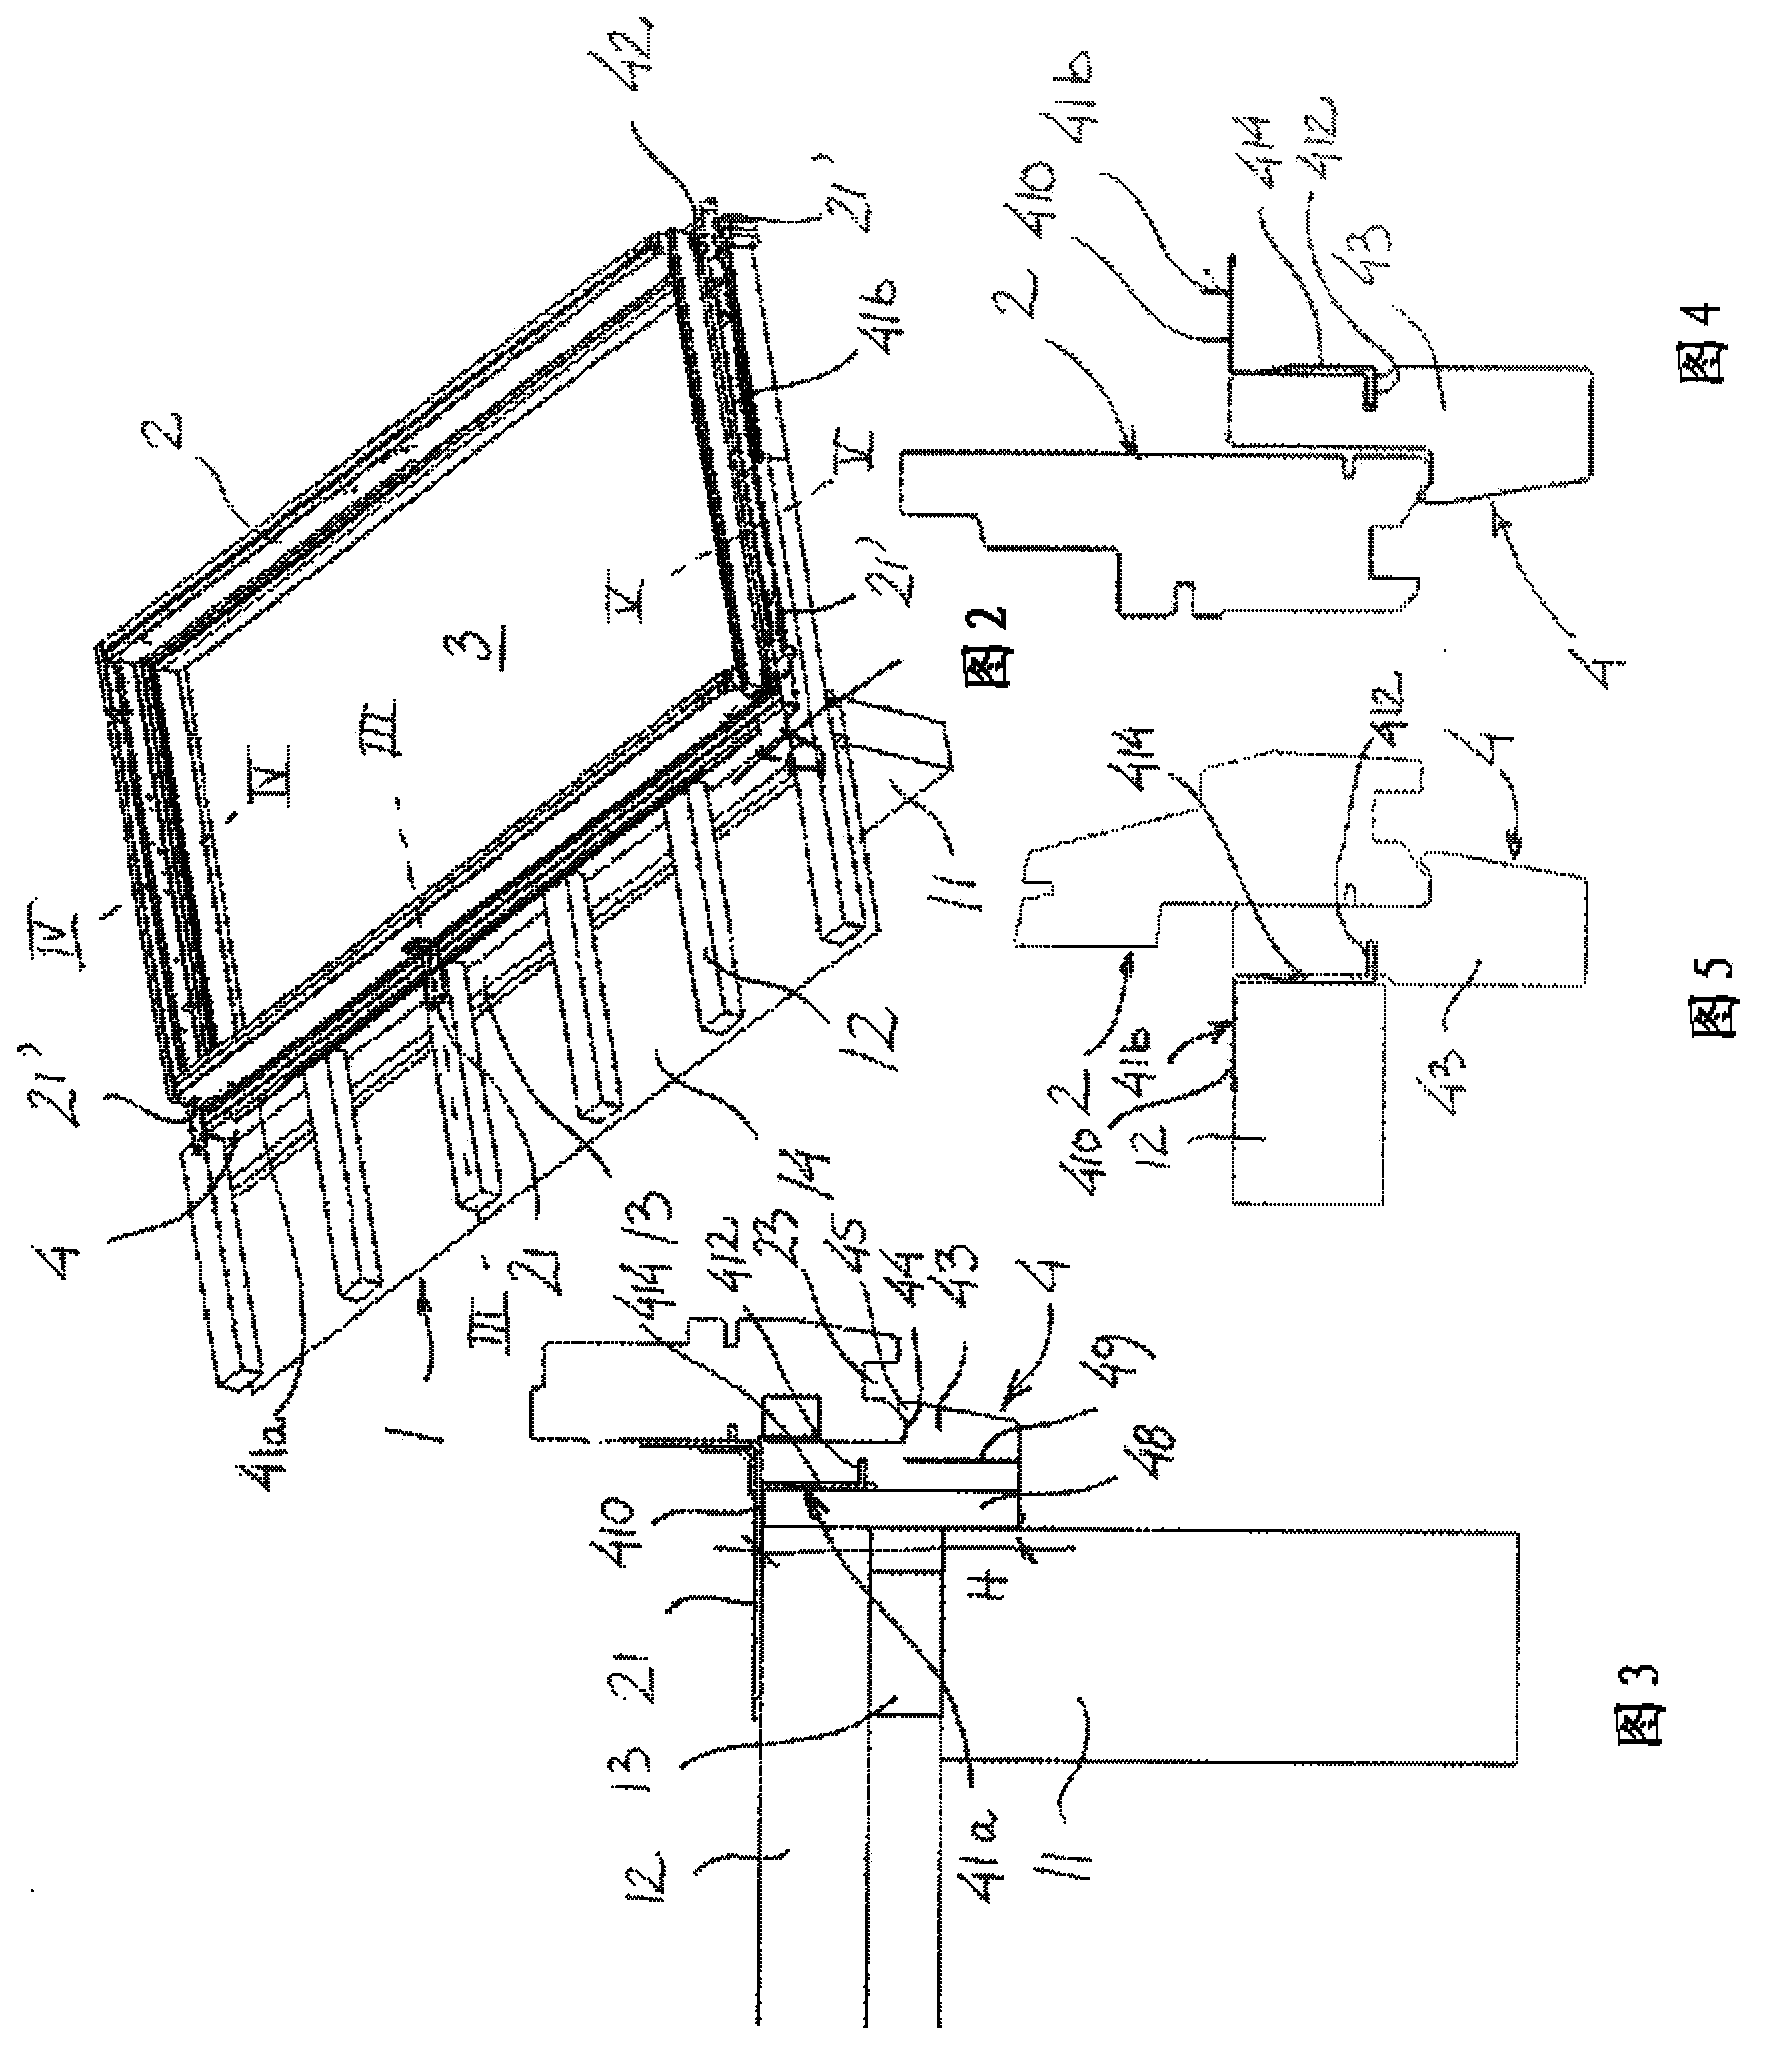 An insulating frame for a roof window and a method of mounting a roof window